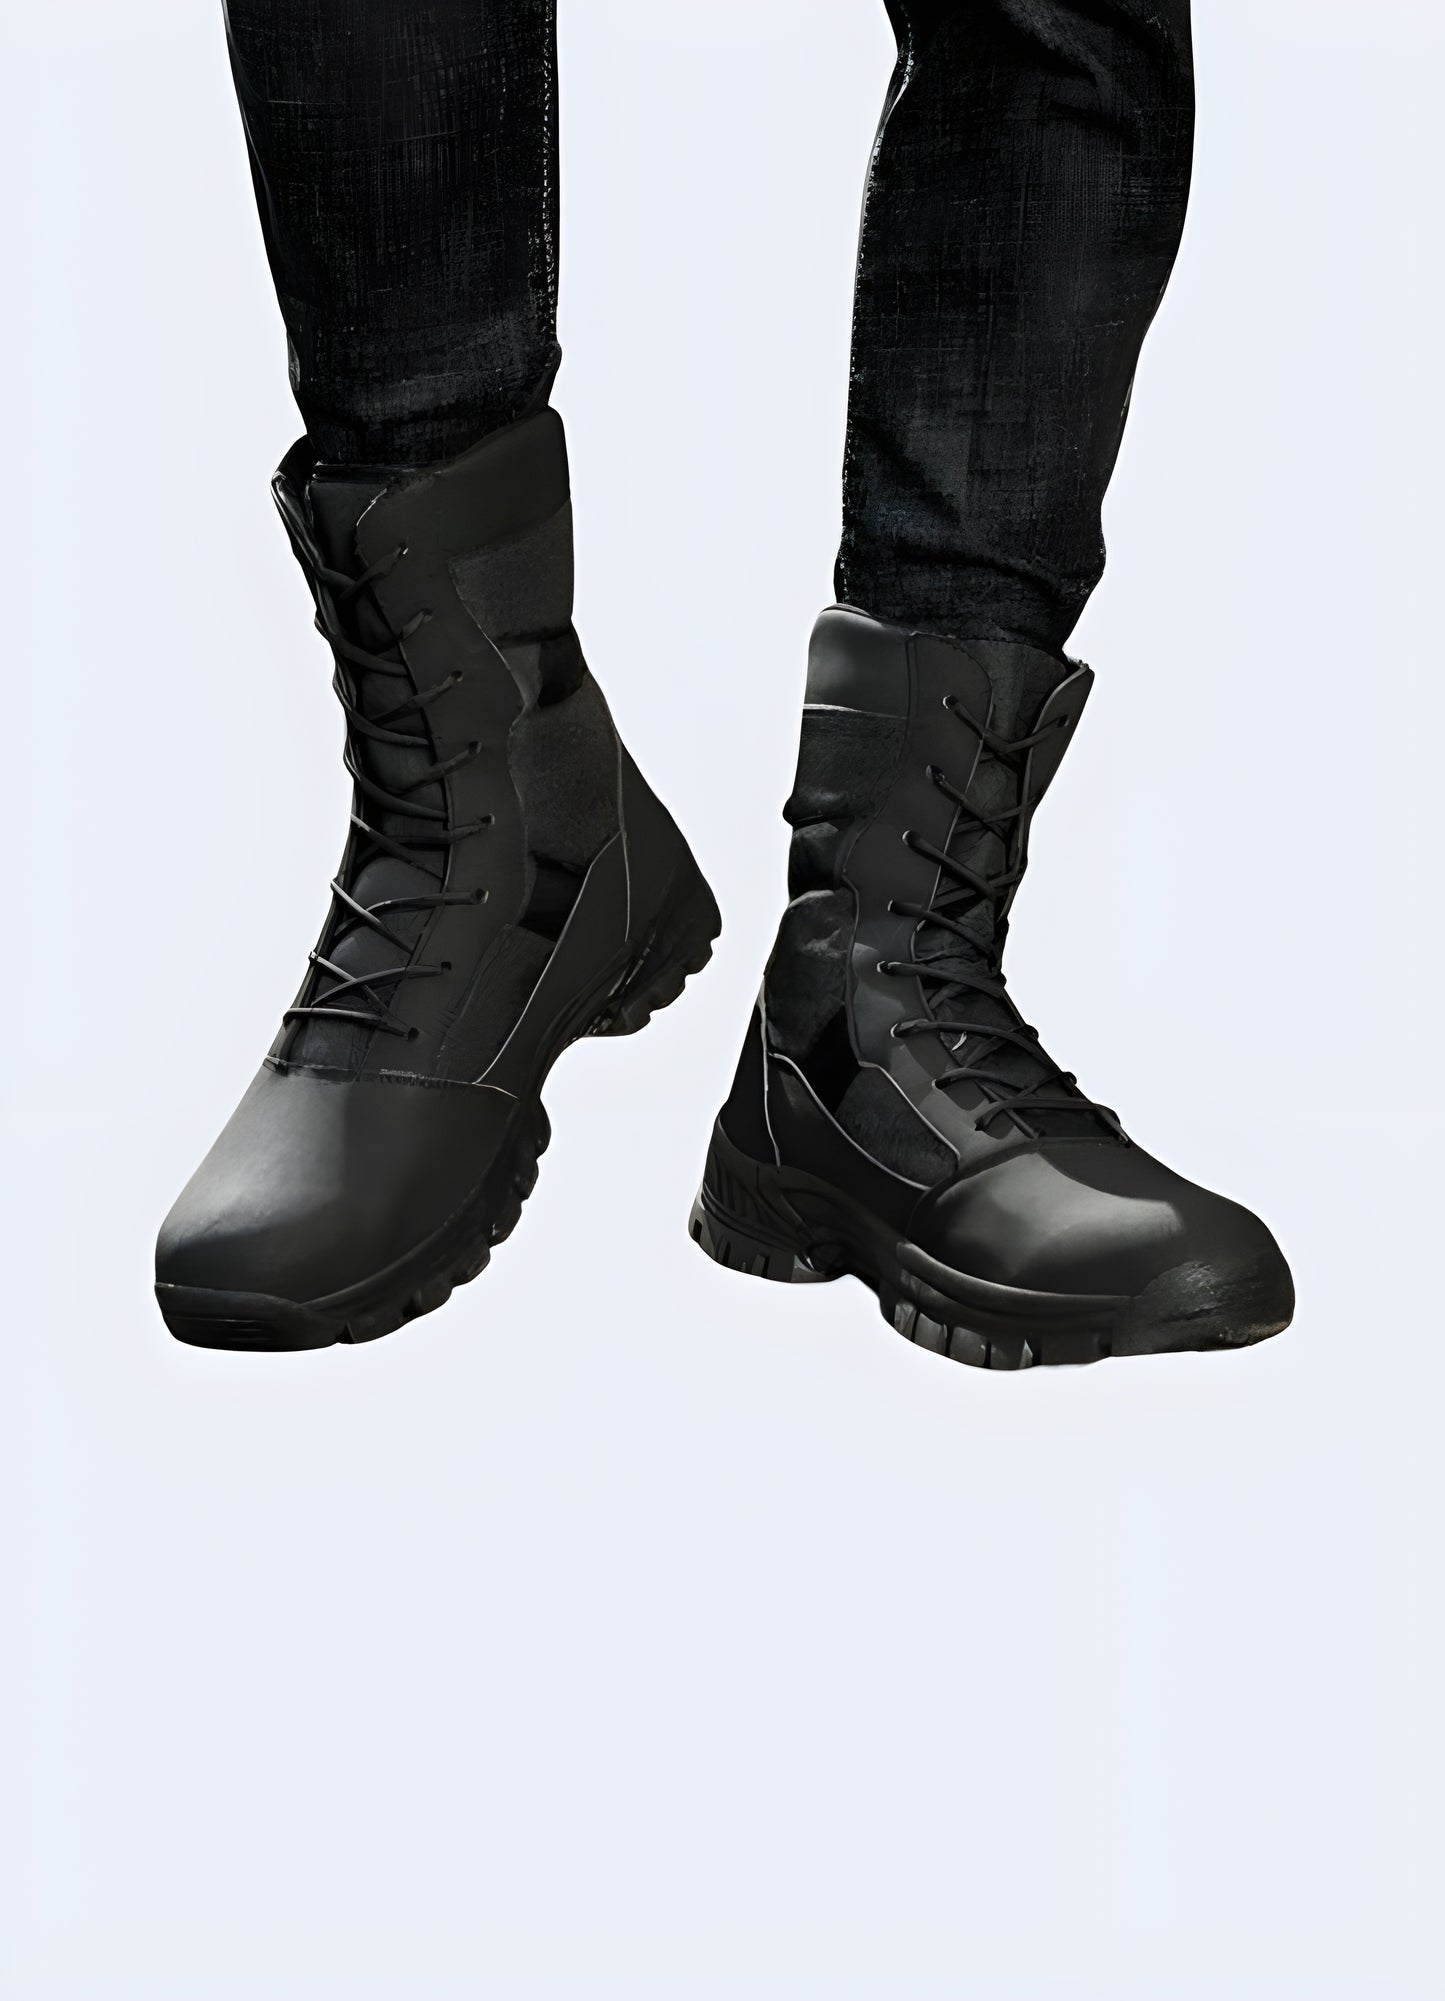 With a sleek, modern design, these boots effortlessly fit into the techwear aesthetic.